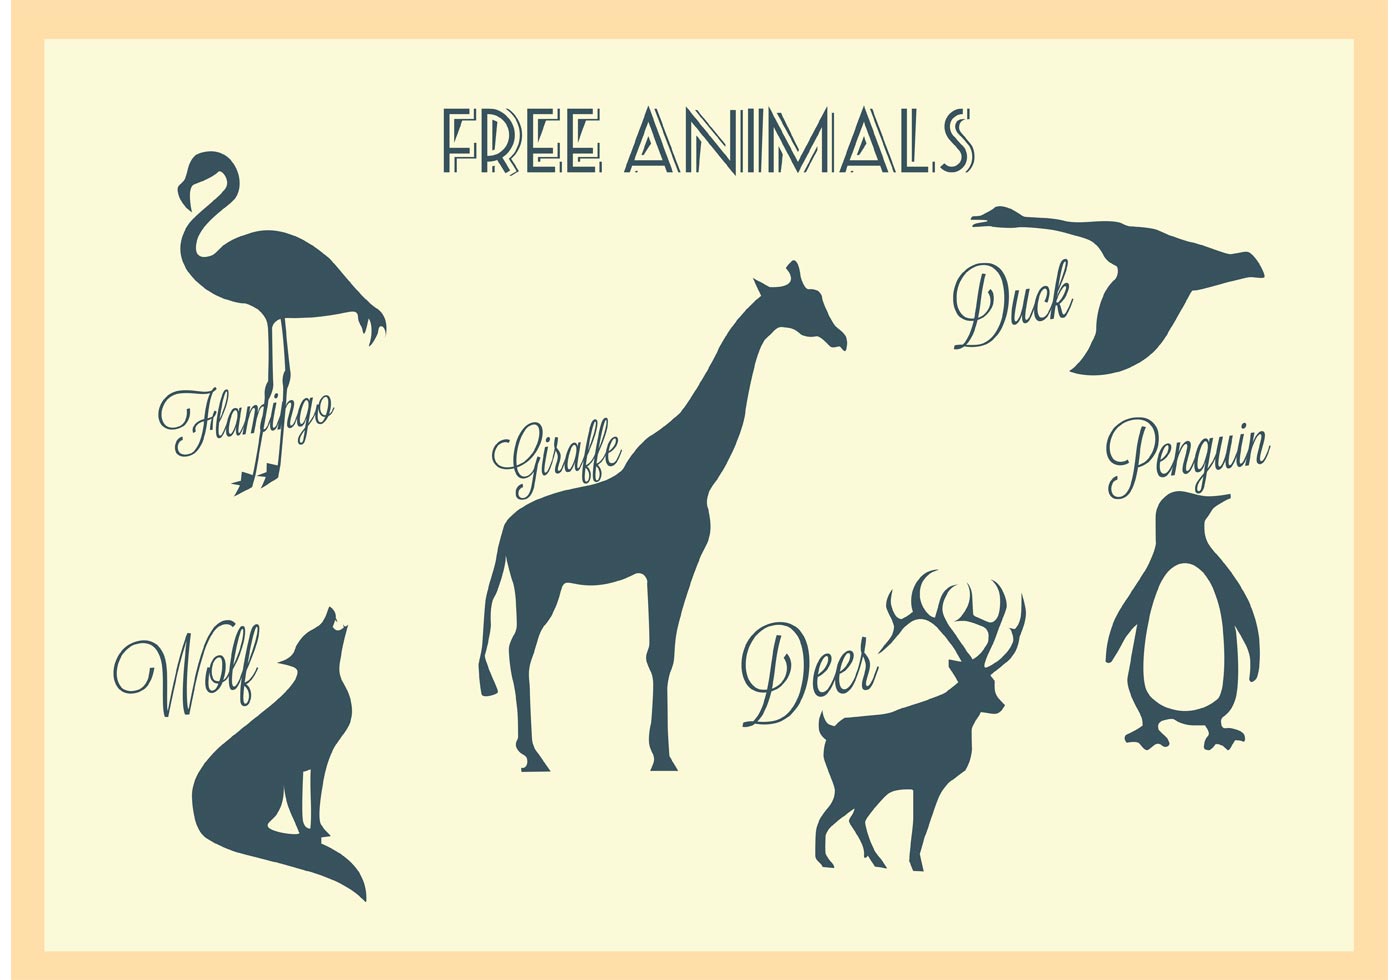 Download Free Vector Animal Silhouettes - Download Free Vectors, Clipart Graphics & Vector Art